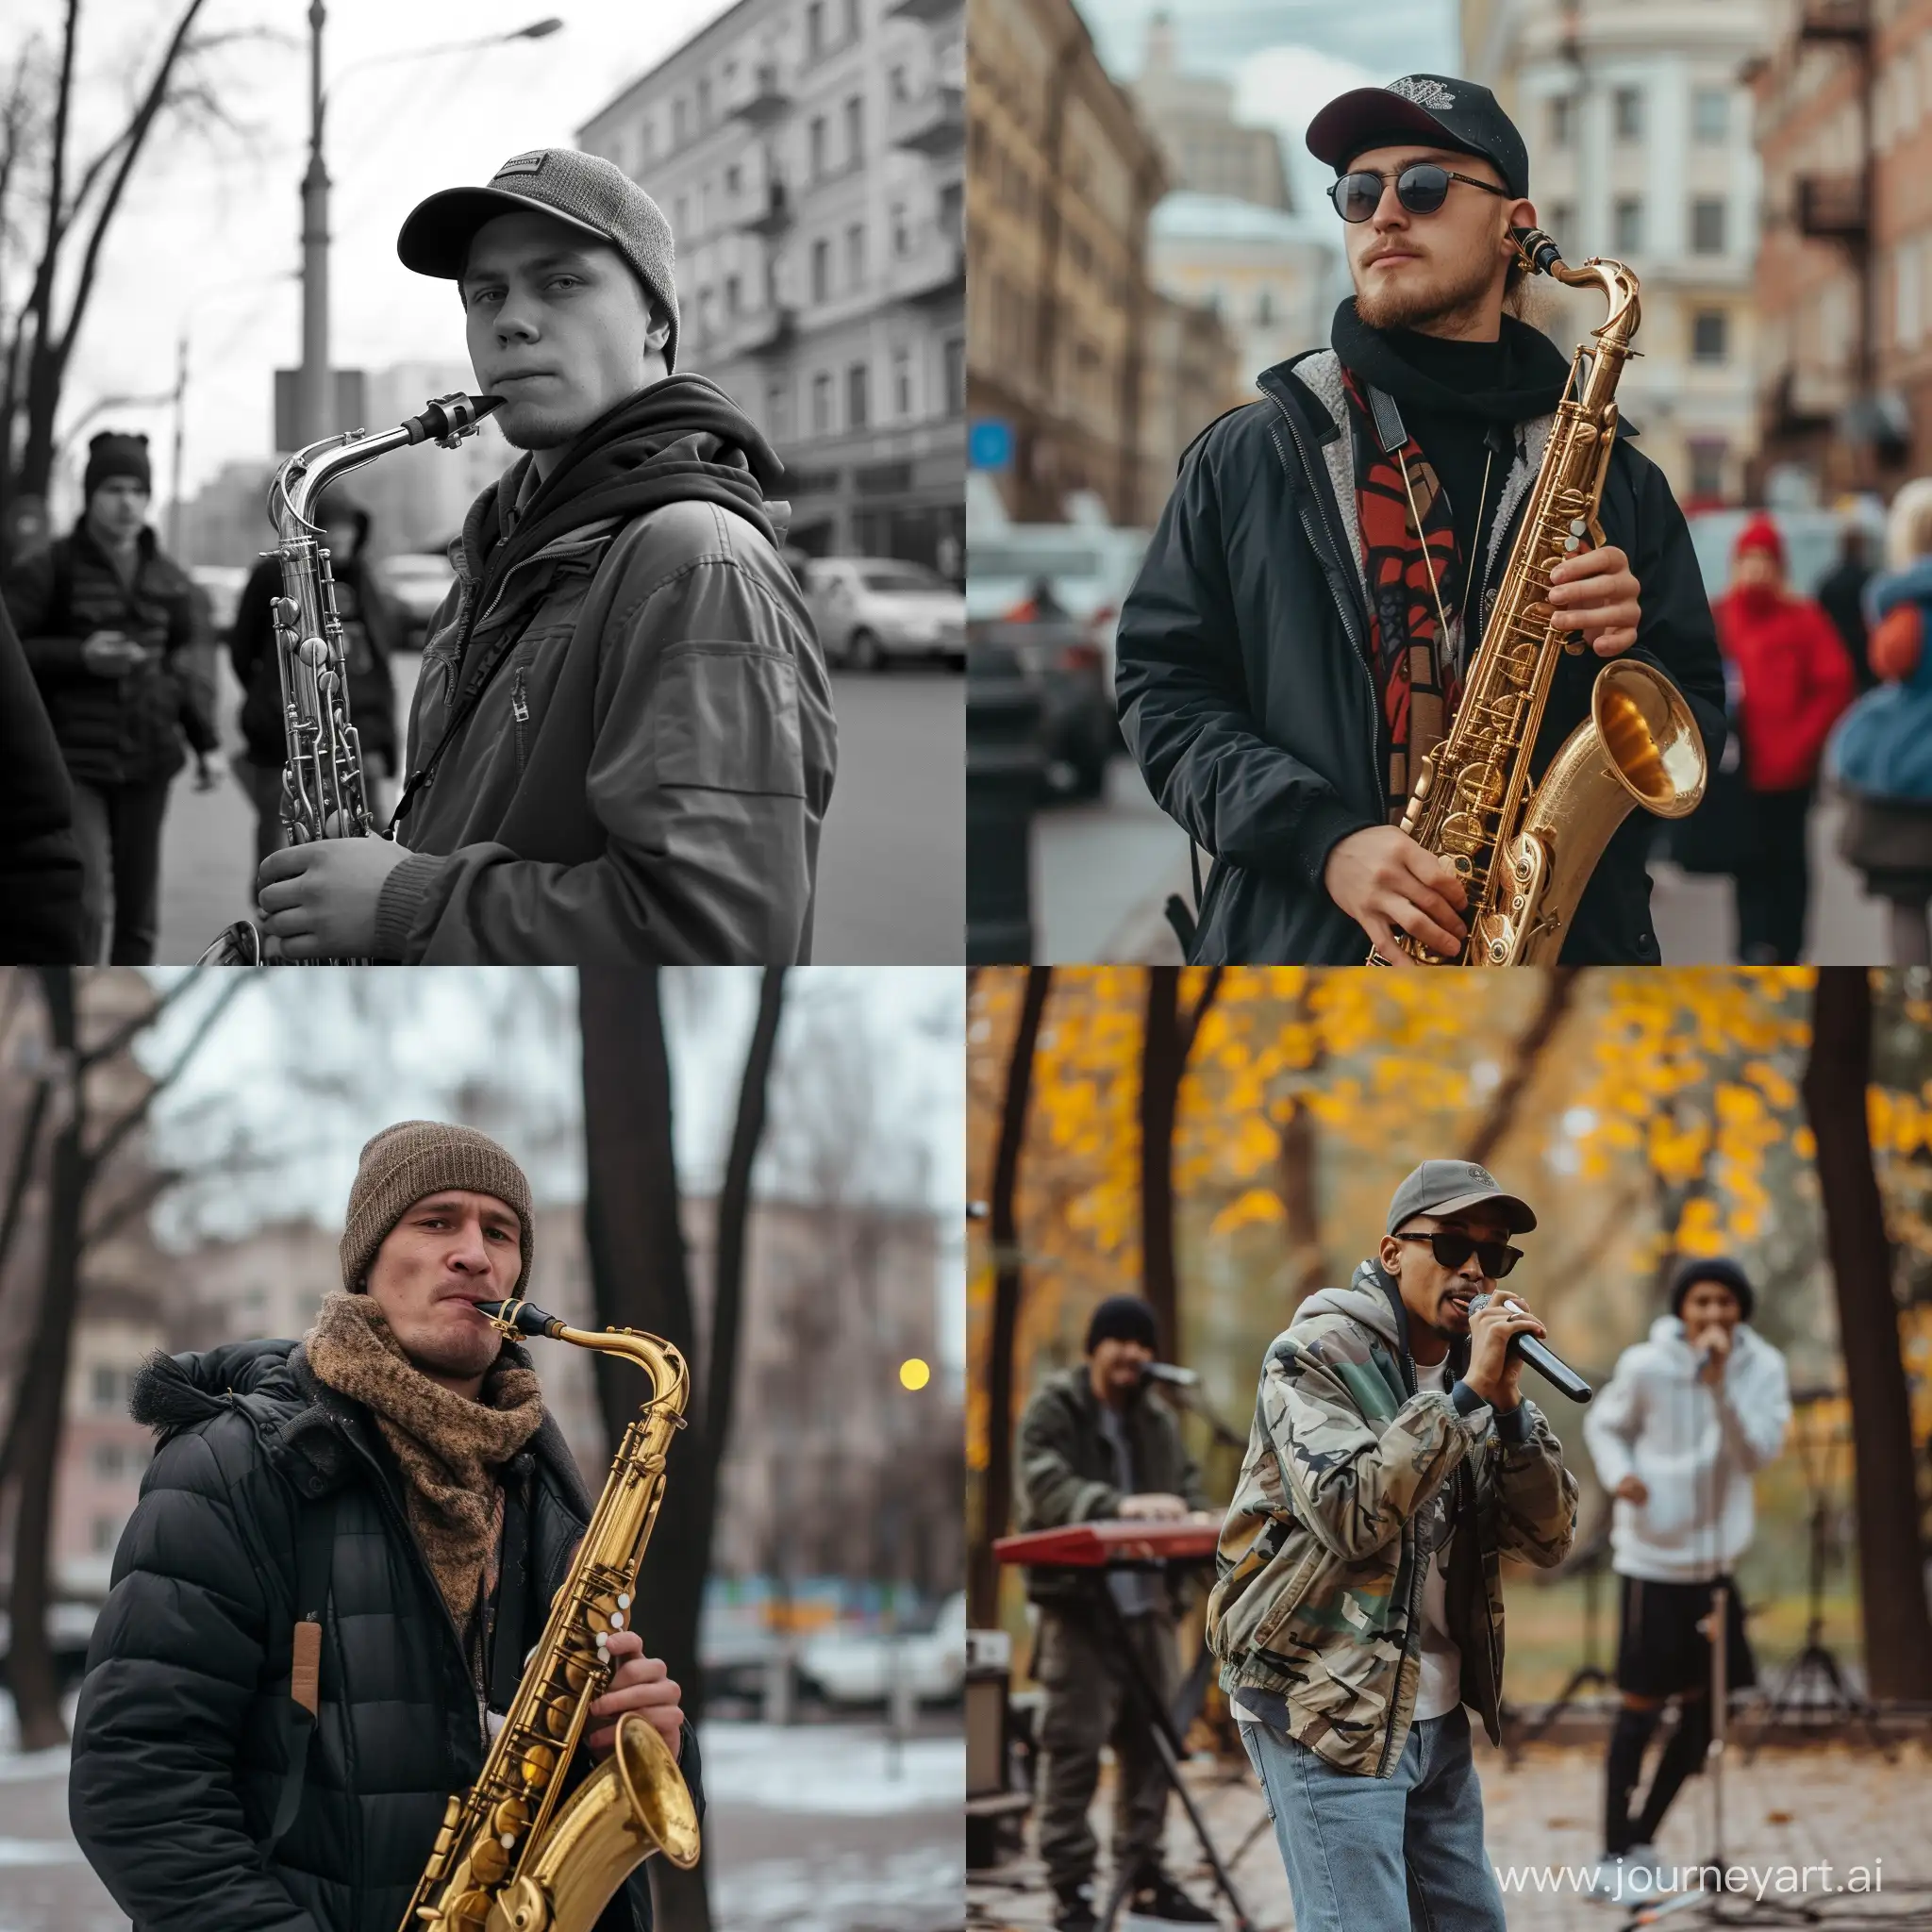 Energetic-Moscow-Jazz-Youthful-Music-Vibes